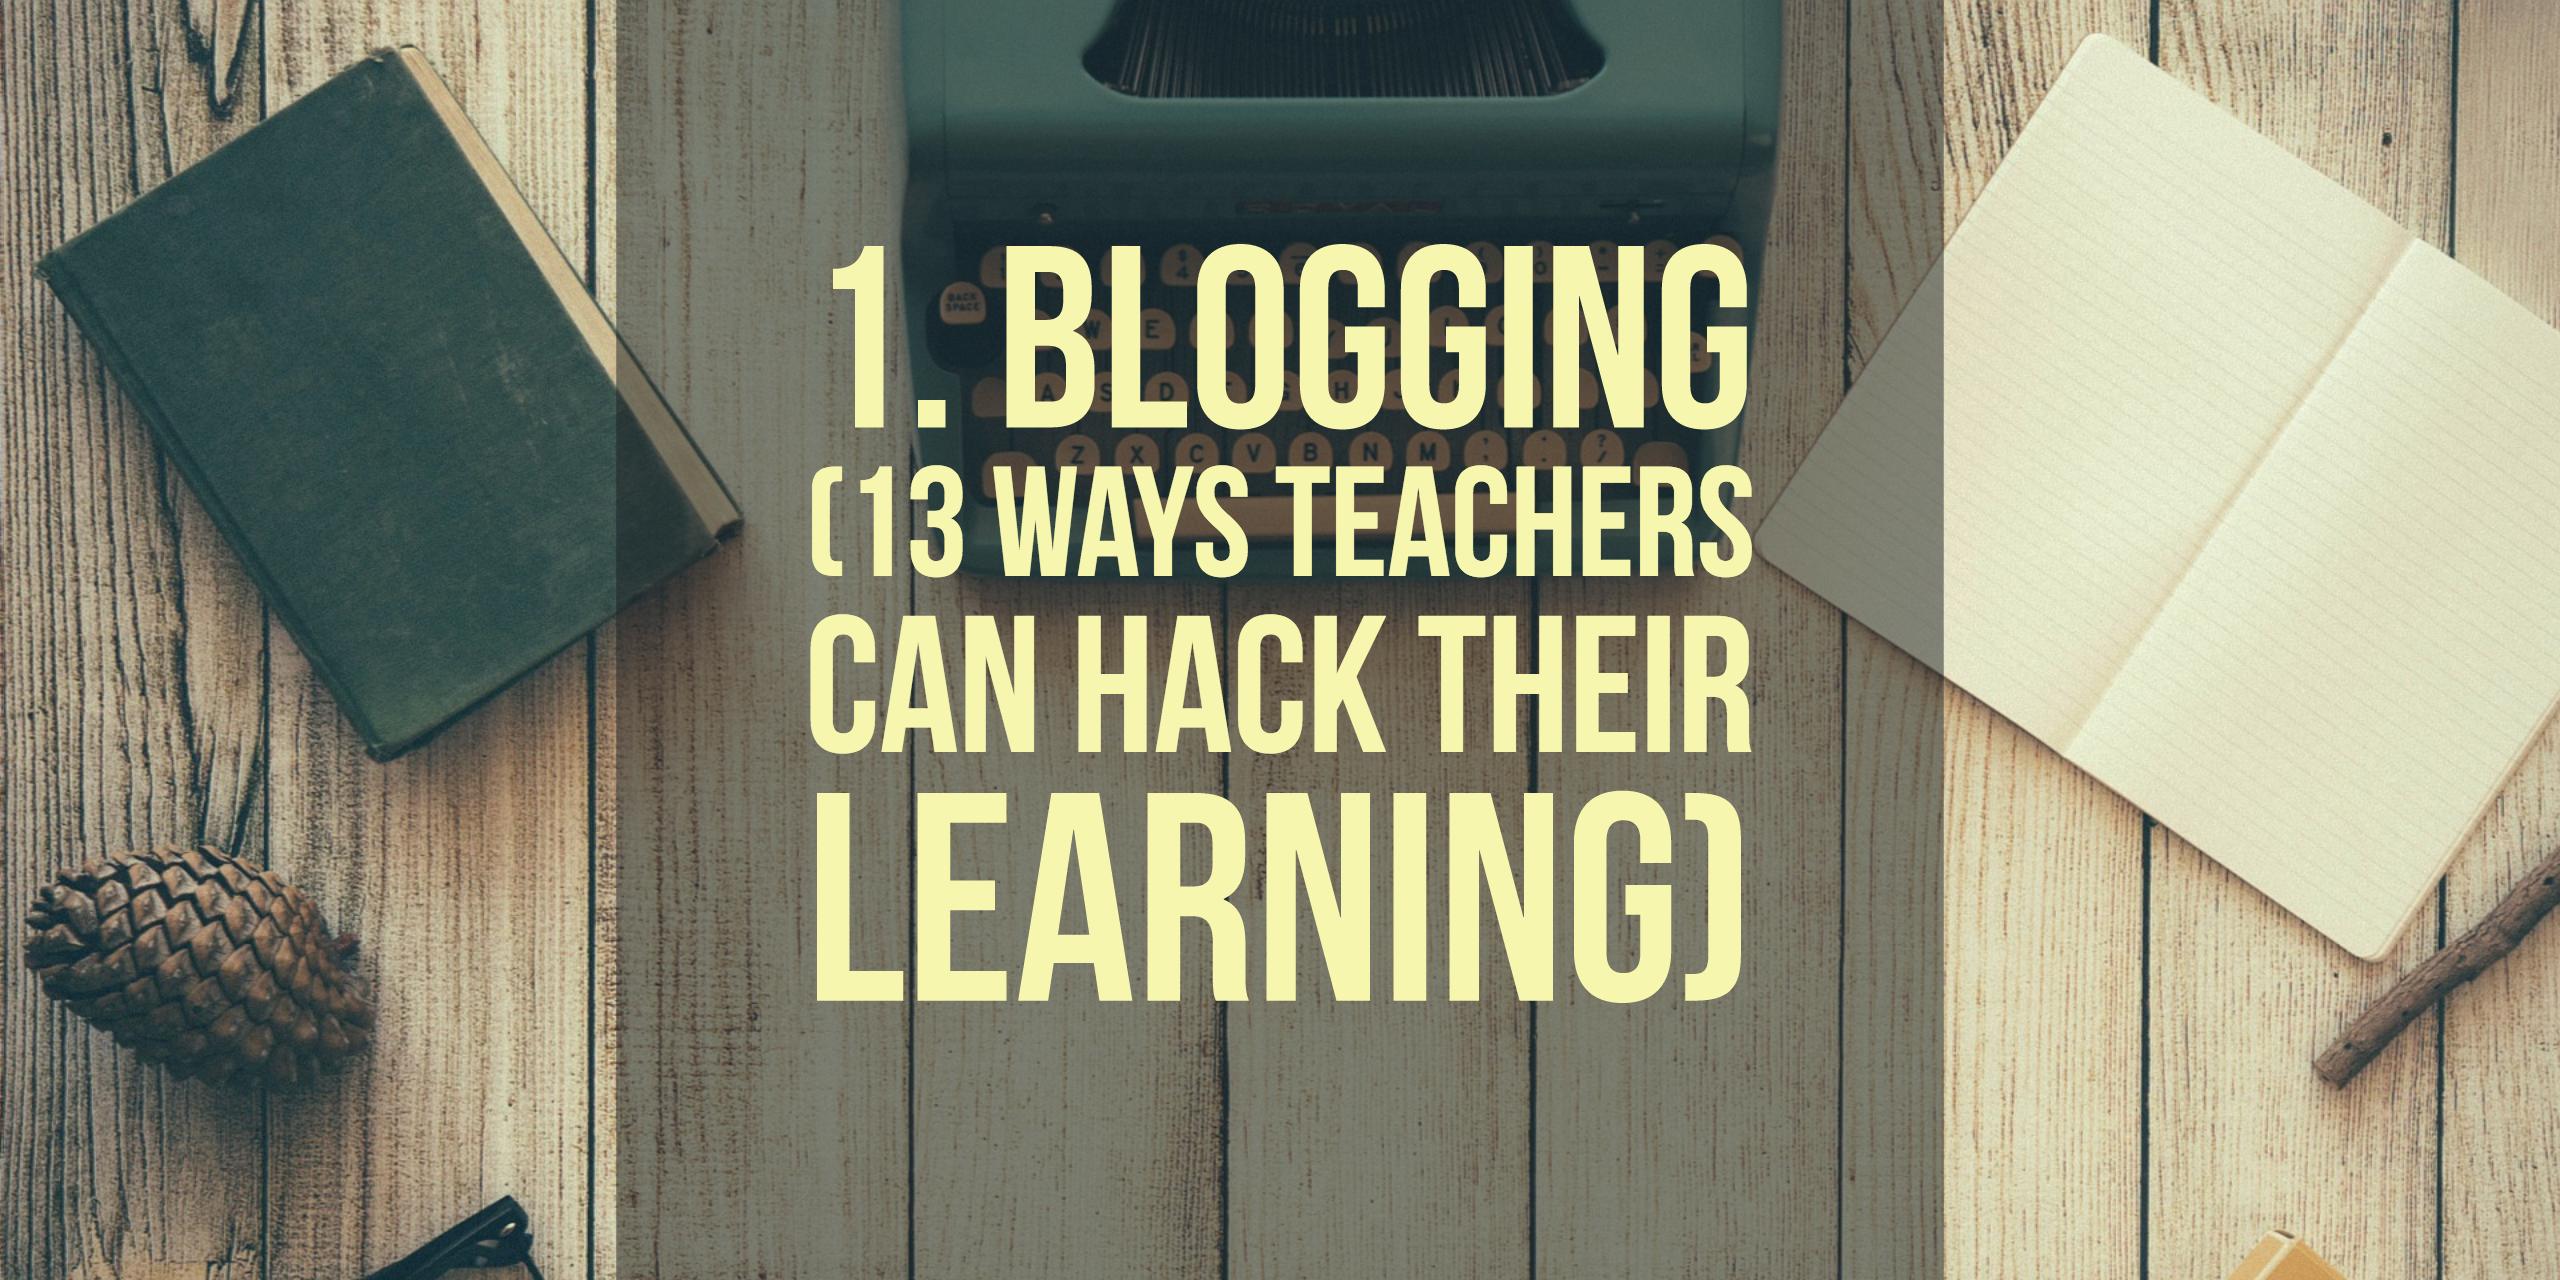 1. Blogging (13 Ways Teachers Can Hack Their Learning)